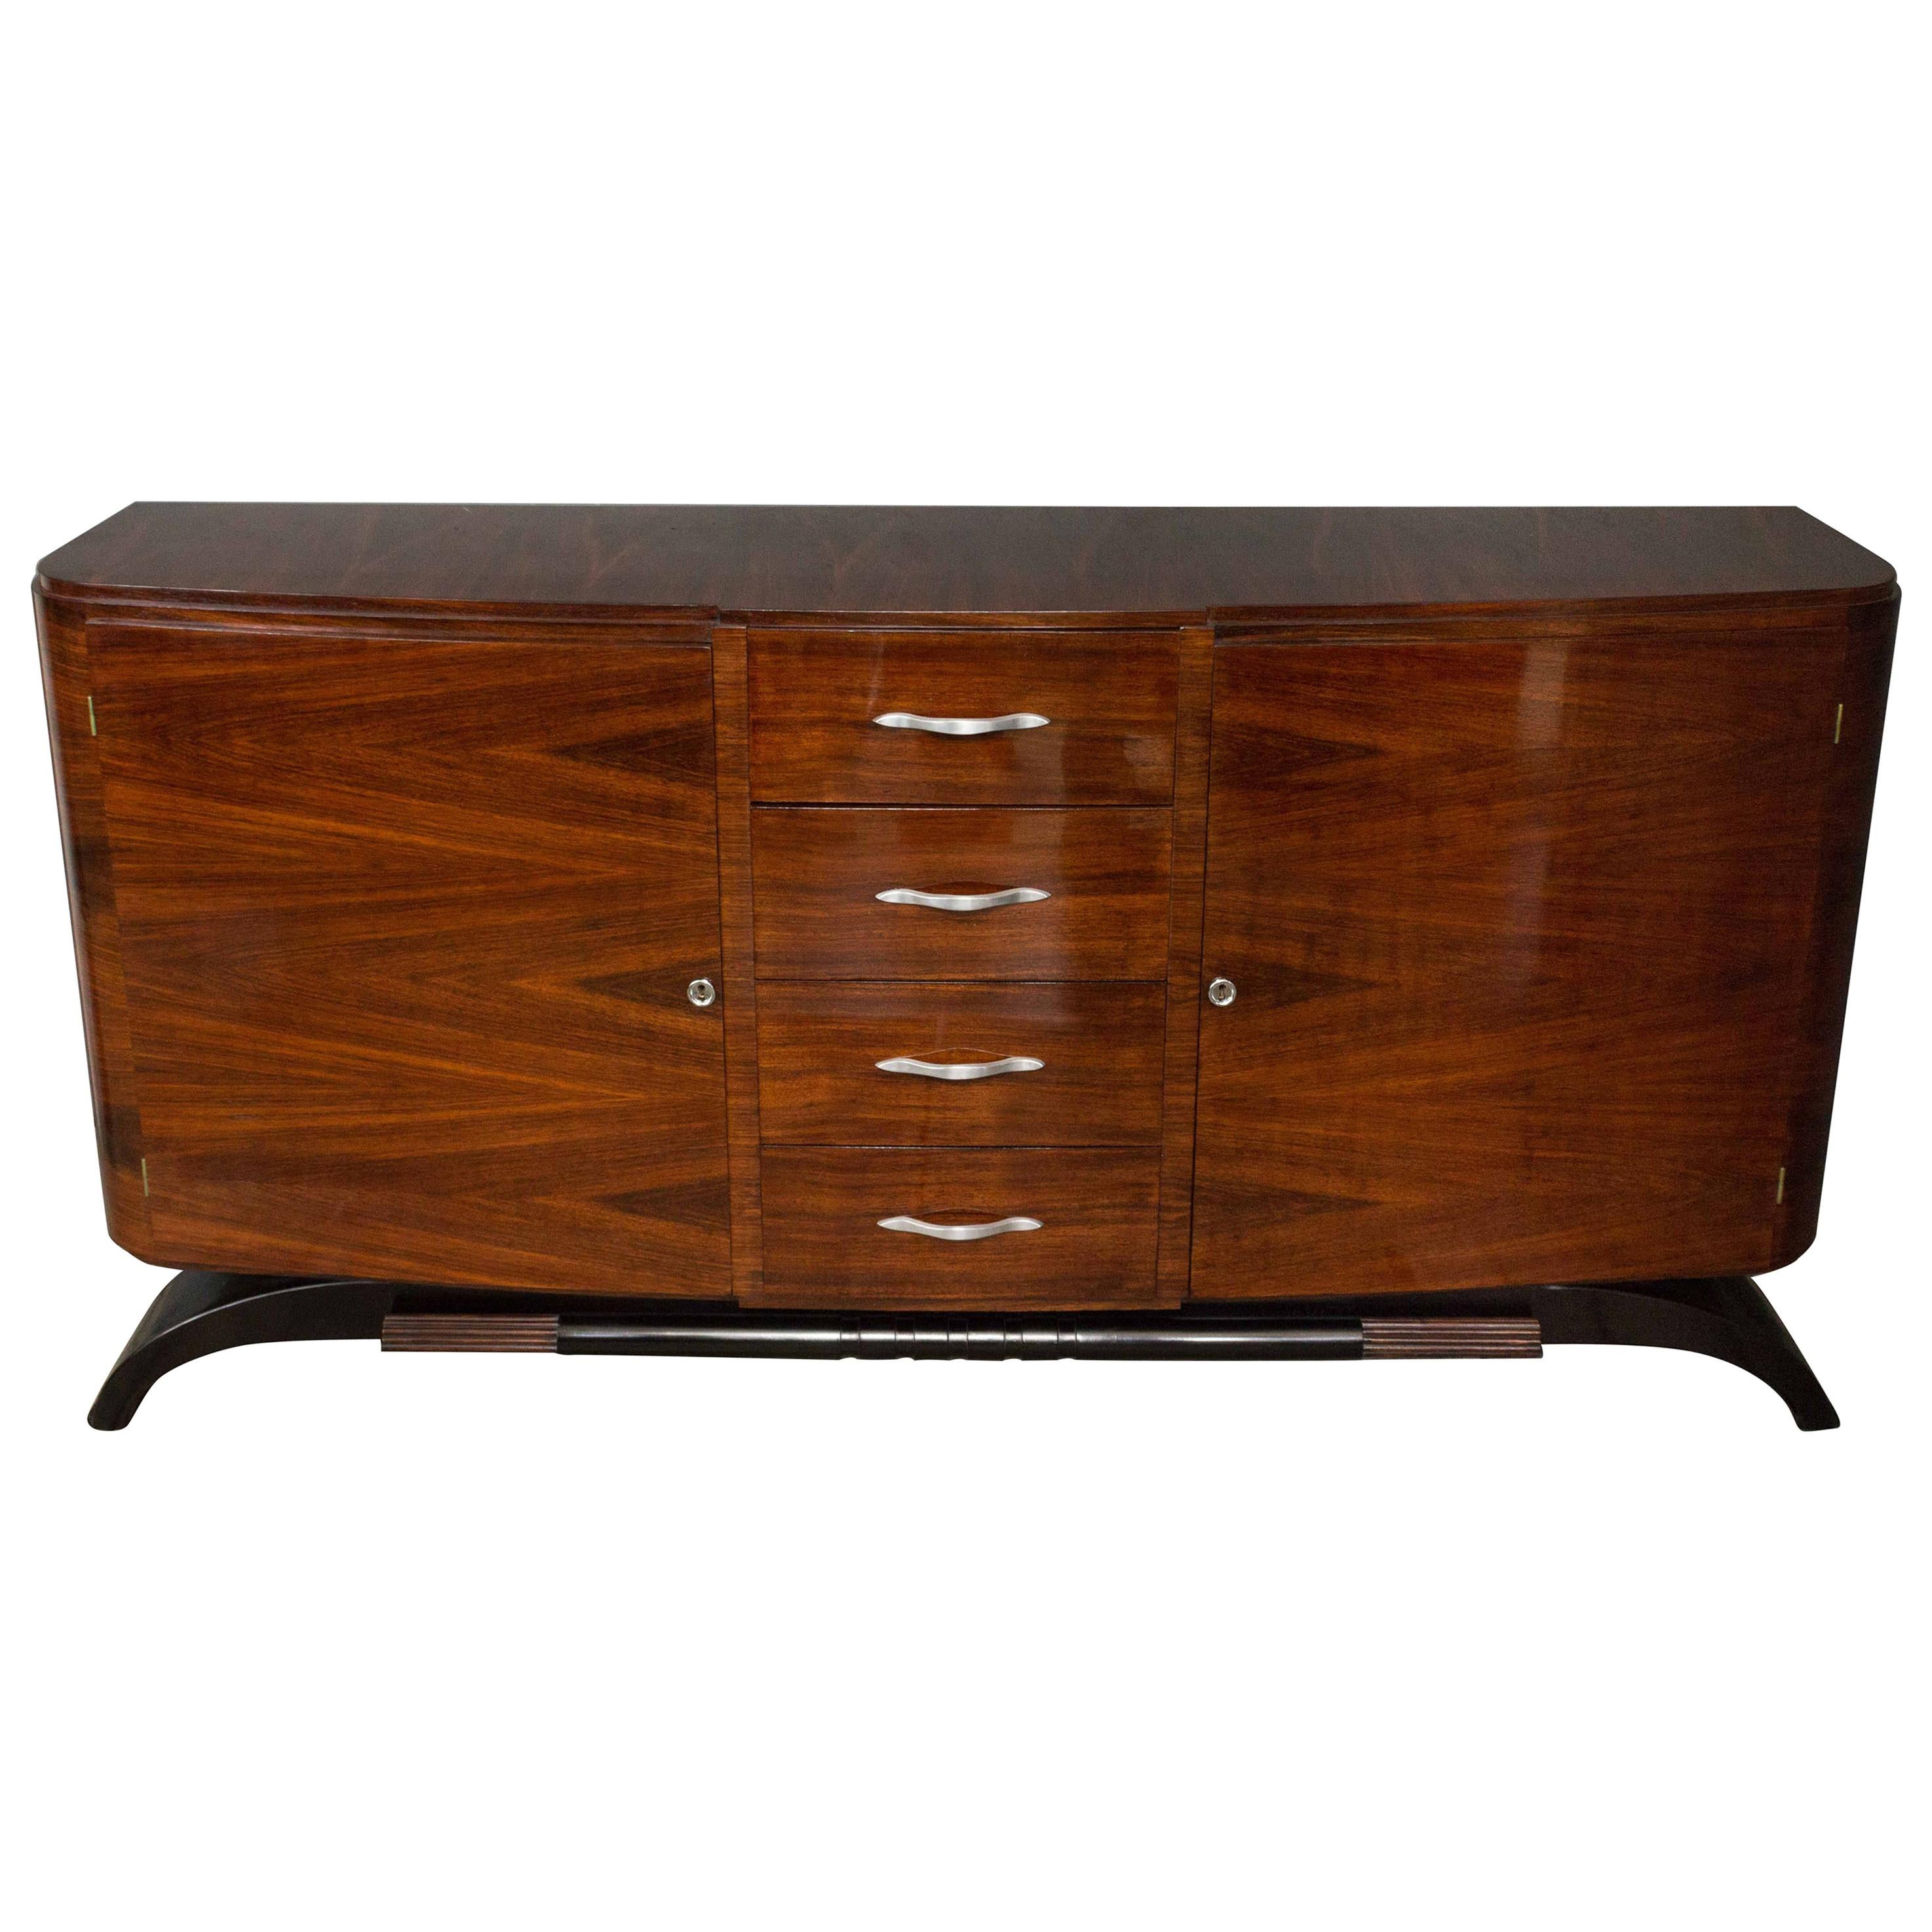 1940s French Rosewood Sideboard